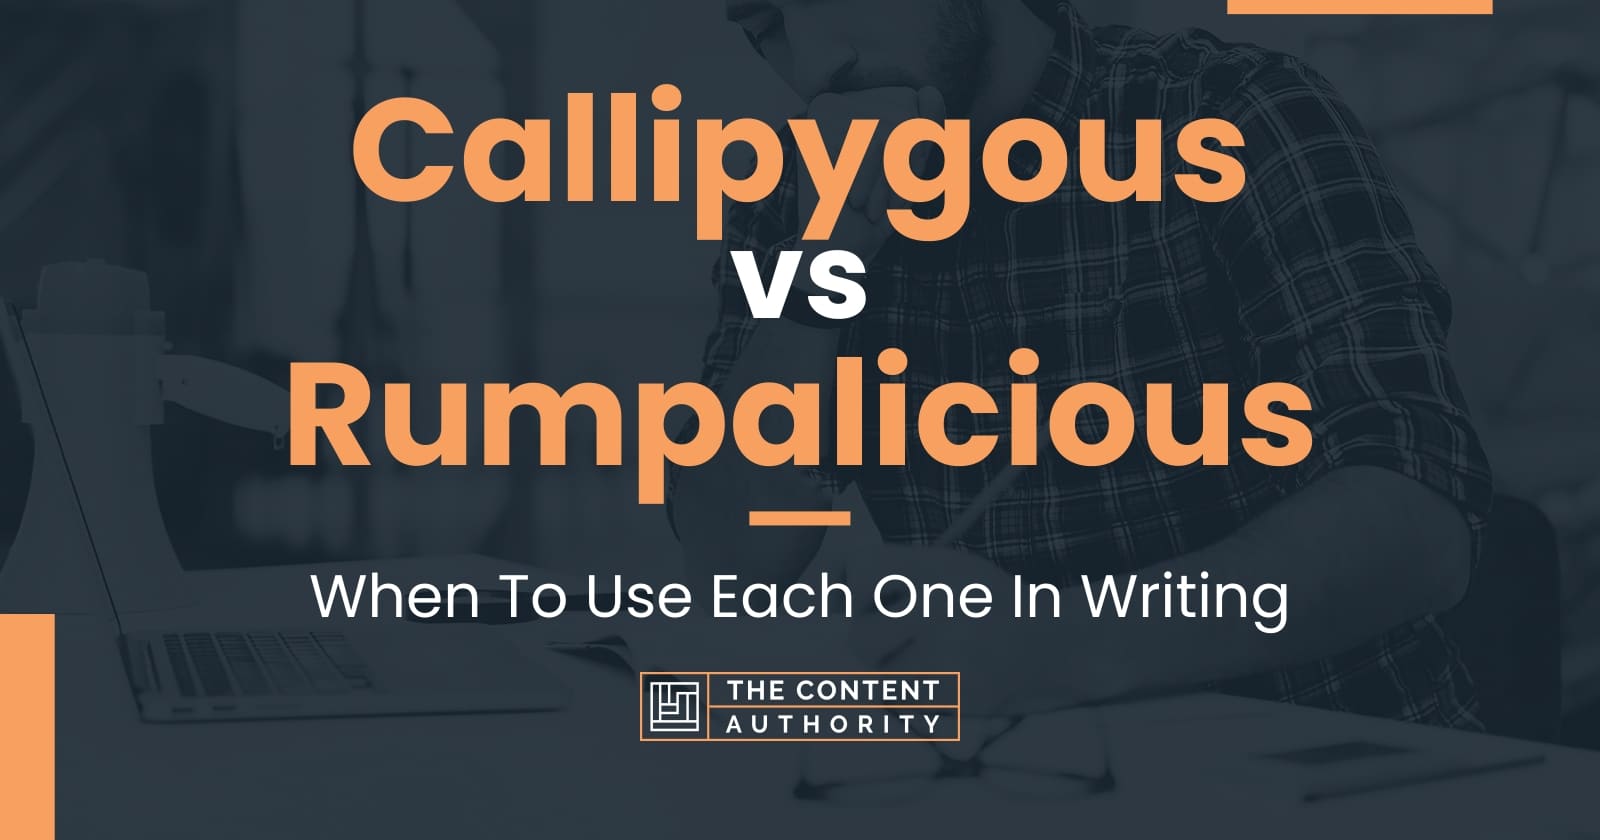 Callipygous vs Rumpalicious: When To Use Each One In Writing